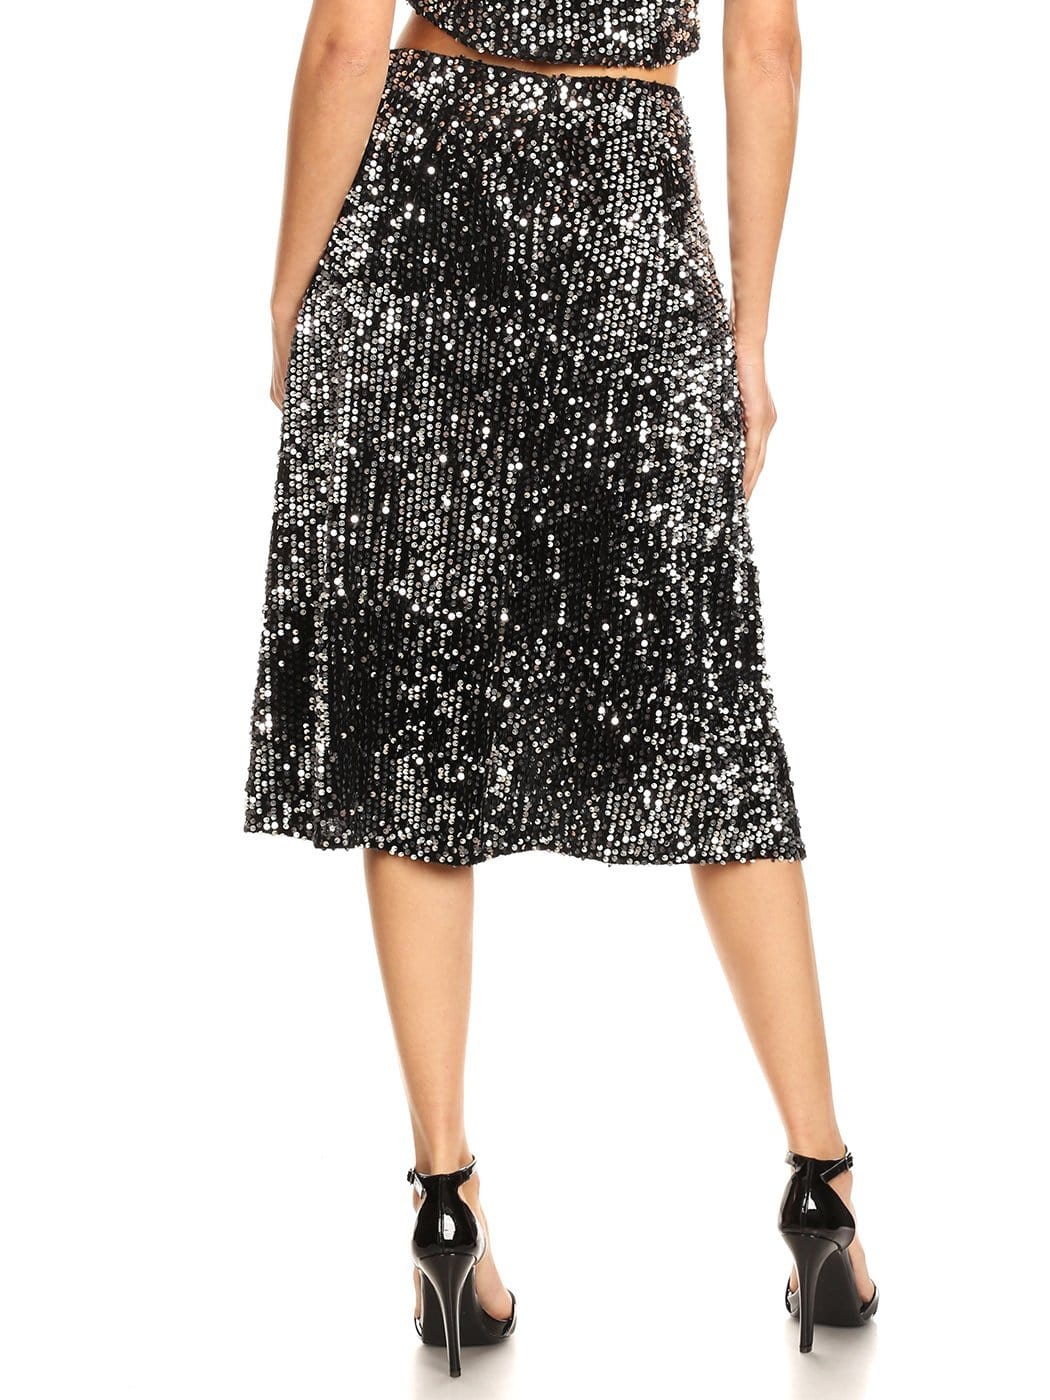 Sparkly Sequin Cocktail Top & Maxi Skirt